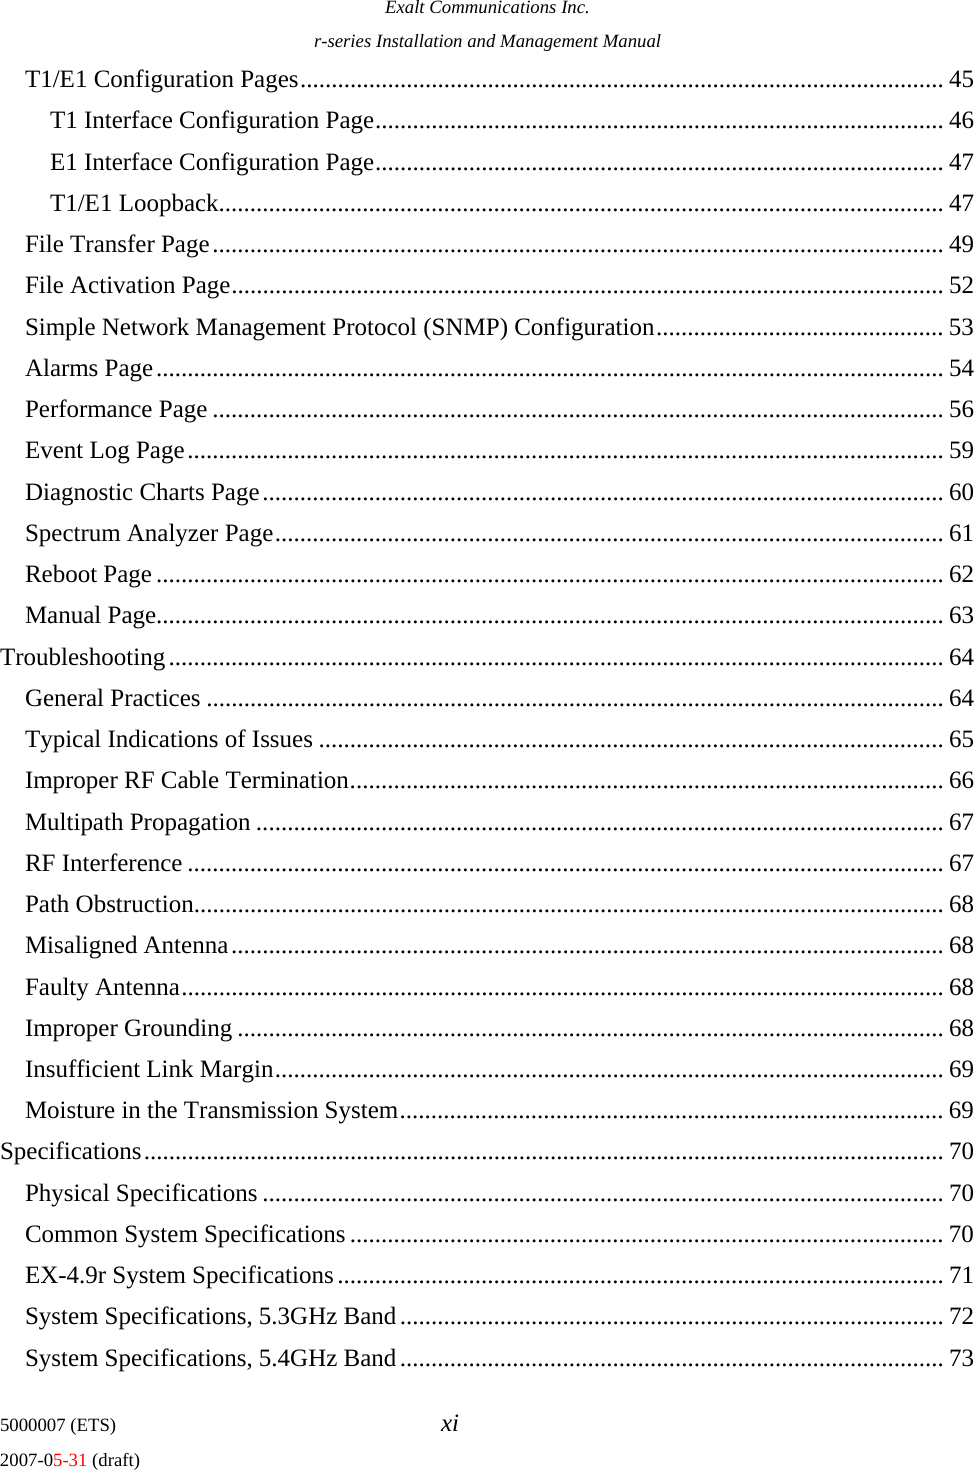 Exalt Communications Inc. r-series Installation and Management Manual 5000007 (ETS)  xi 2007-05-31 (draft) T1/E1 Configuration Pages....................................................................................................... 45 T1 Interface Configuration Page........................................................................................... 46 E1 Interface Configuration Page........................................................................................... 47 T1/E1 Loopback.................................................................................................................... 47 File Transfer Page..................................................................................................................... 49 File Activation Page.................................................................................................................. 52 Simple Network Management Protocol (SNMP) Configuration.............................................. 53 Alarms Page.............................................................................................................................. 54 Performance Page ..................................................................................................................... 56 Event Log Page......................................................................................................................... 59 Diagnostic Charts Page............................................................................................................. 60 Spectrum Analyzer Page........................................................................................................... 61 Reboot Page .............................................................................................................................. 62 Manual Page.............................................................................................................................. 63 Troubleshooting............................................................................................................................ 64 General Practices ...................................................................................................................... 64 Typical Indications of Issues .................................................................................................... 65 Improper RF Cable Termination............................................................................................... 66 Multipath Propagation .............................................................................................................. 67 RF Interference ......................................................................................................................... 67 Path Obstruction........................................................................................................................ 68 Misaligned Antenna.................................................................................................................. 68 Faulty Antenna.......................................................................................................................... 68 Improper Grounding ................................................................................................................. 68 Insufficient Link Margin........................................................................................................... 69 Moisture in the Transmission System....................................................................................... 69 Specifications................................................................................................................................ 70 Physical Specifications ............................................................................................................. 70 Common System Specifications............................................................................................... 70 EX-4.9r System Specifications................................................................................................. 71 System Specifications, 5.3GHz Band....................................................................................... 72 System Specifications, 5.4GHz Band....................................................................................... 73 